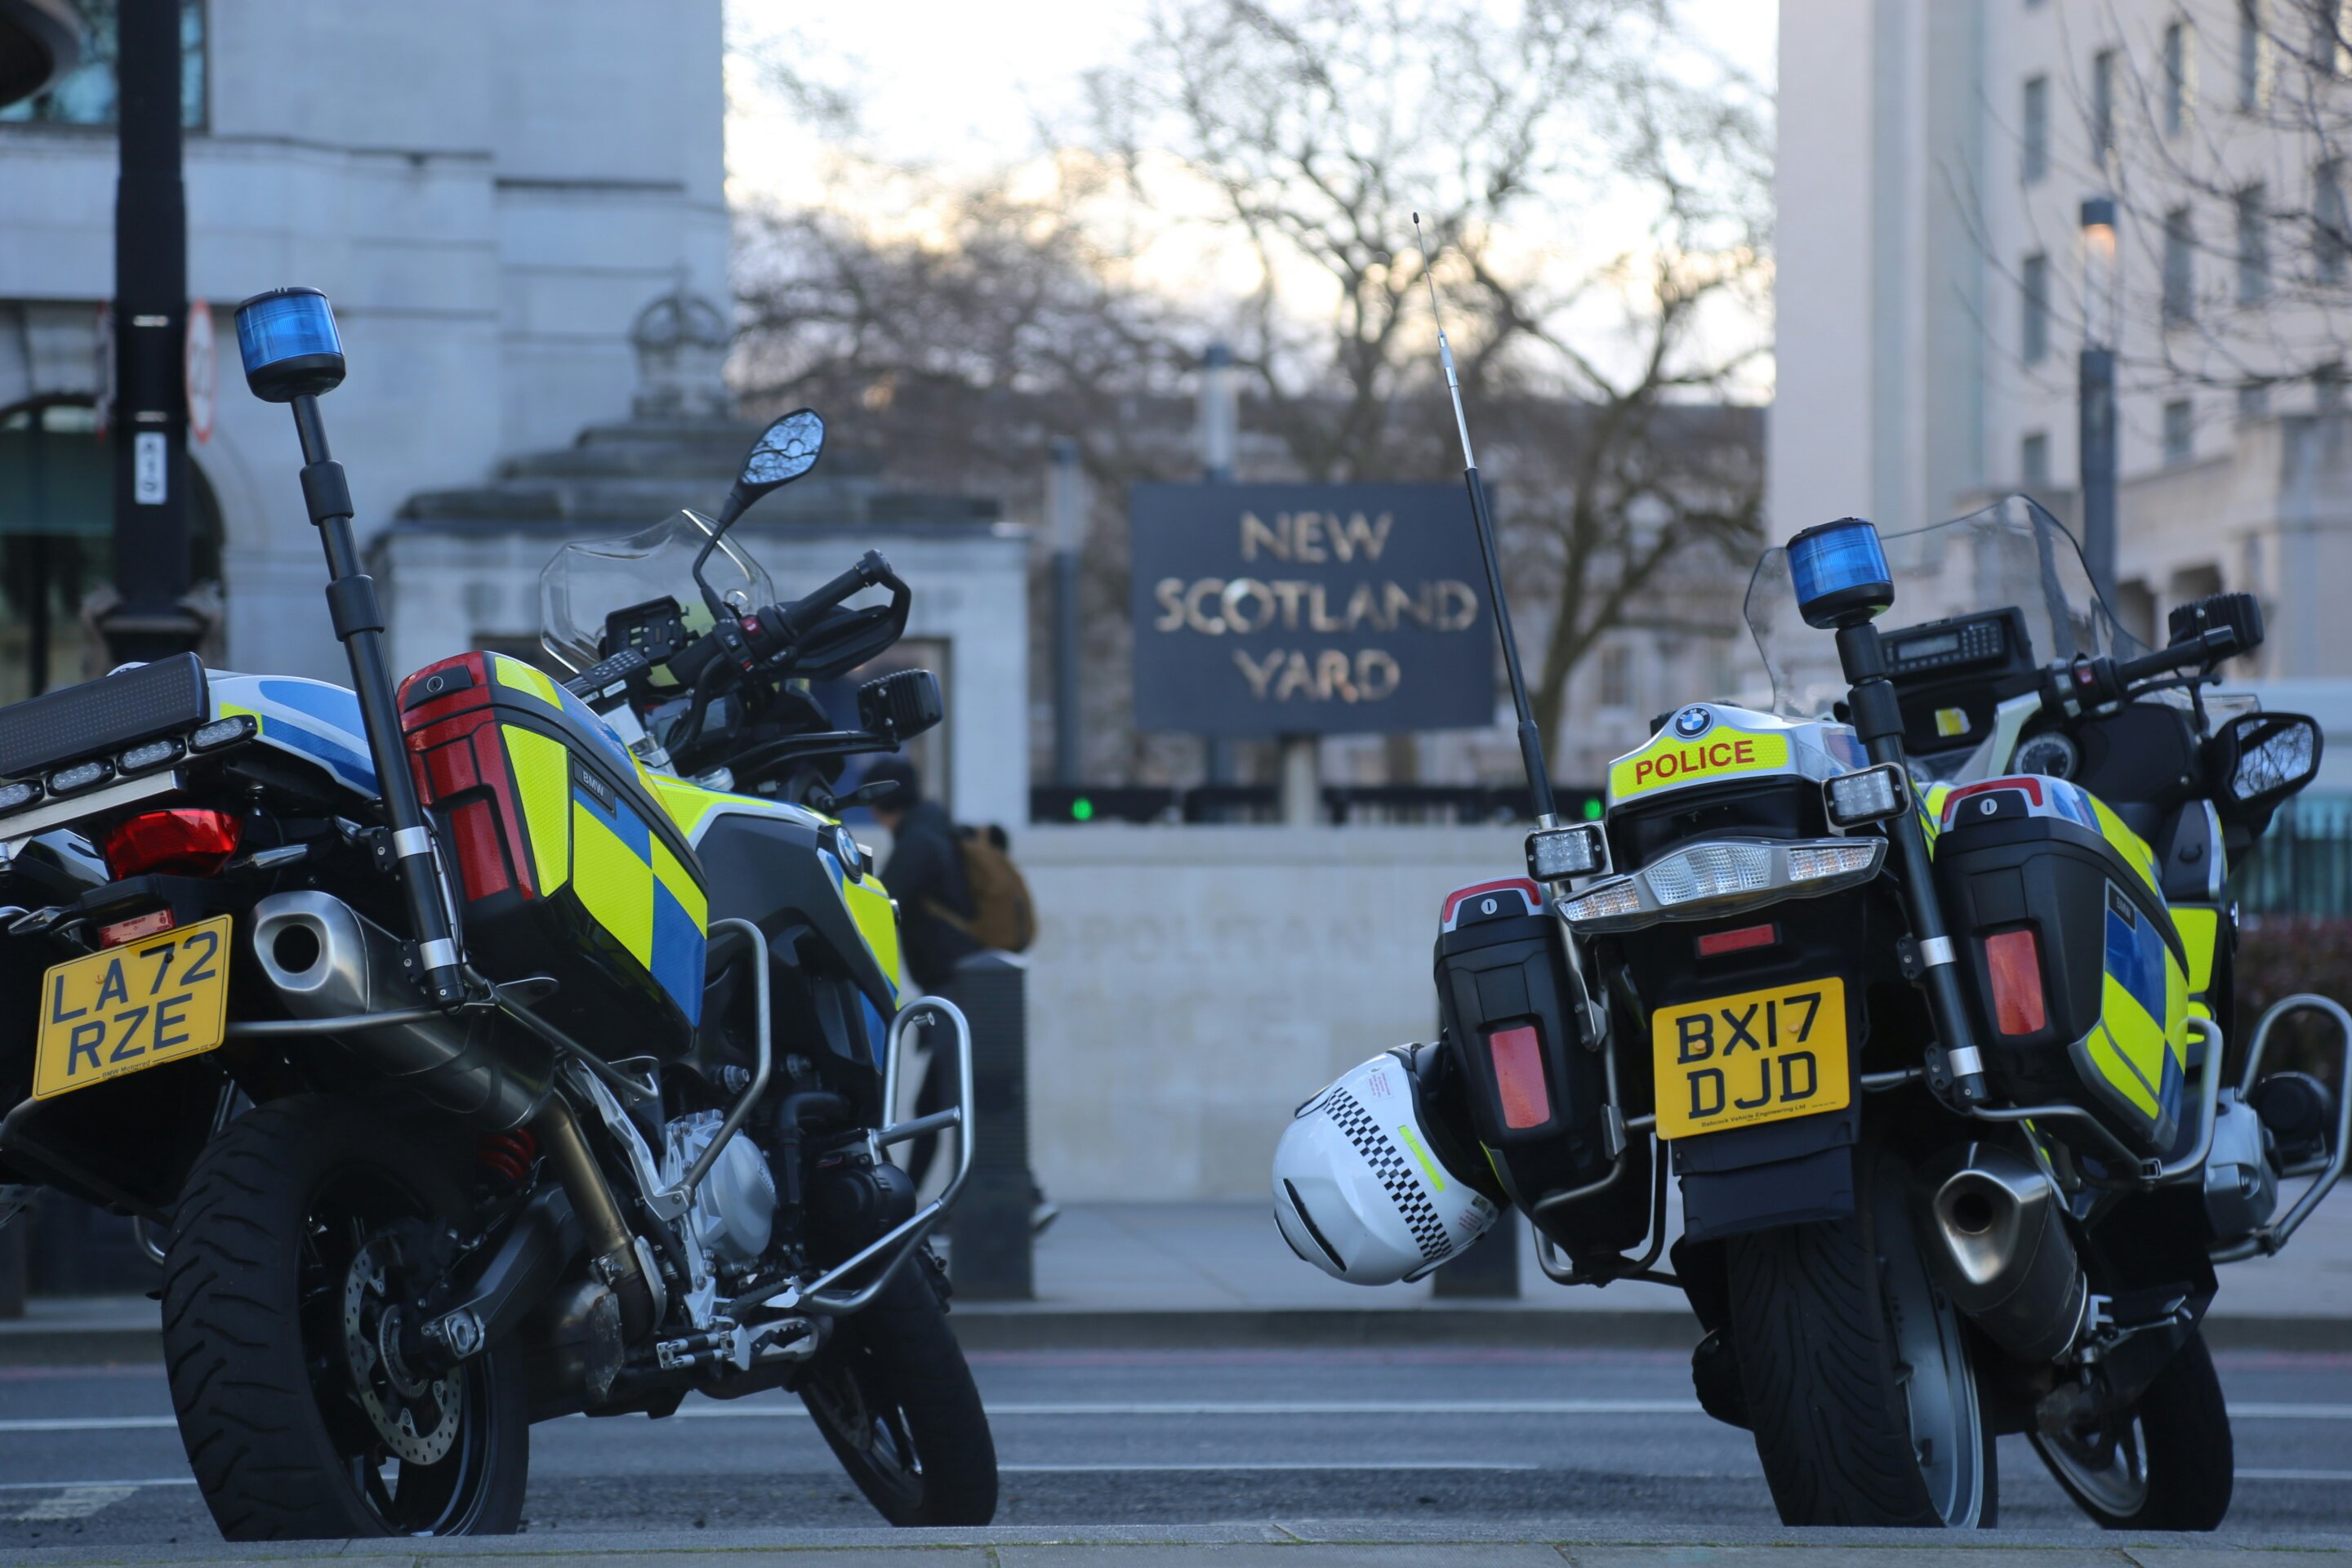 #Study finds London police least trusted by women